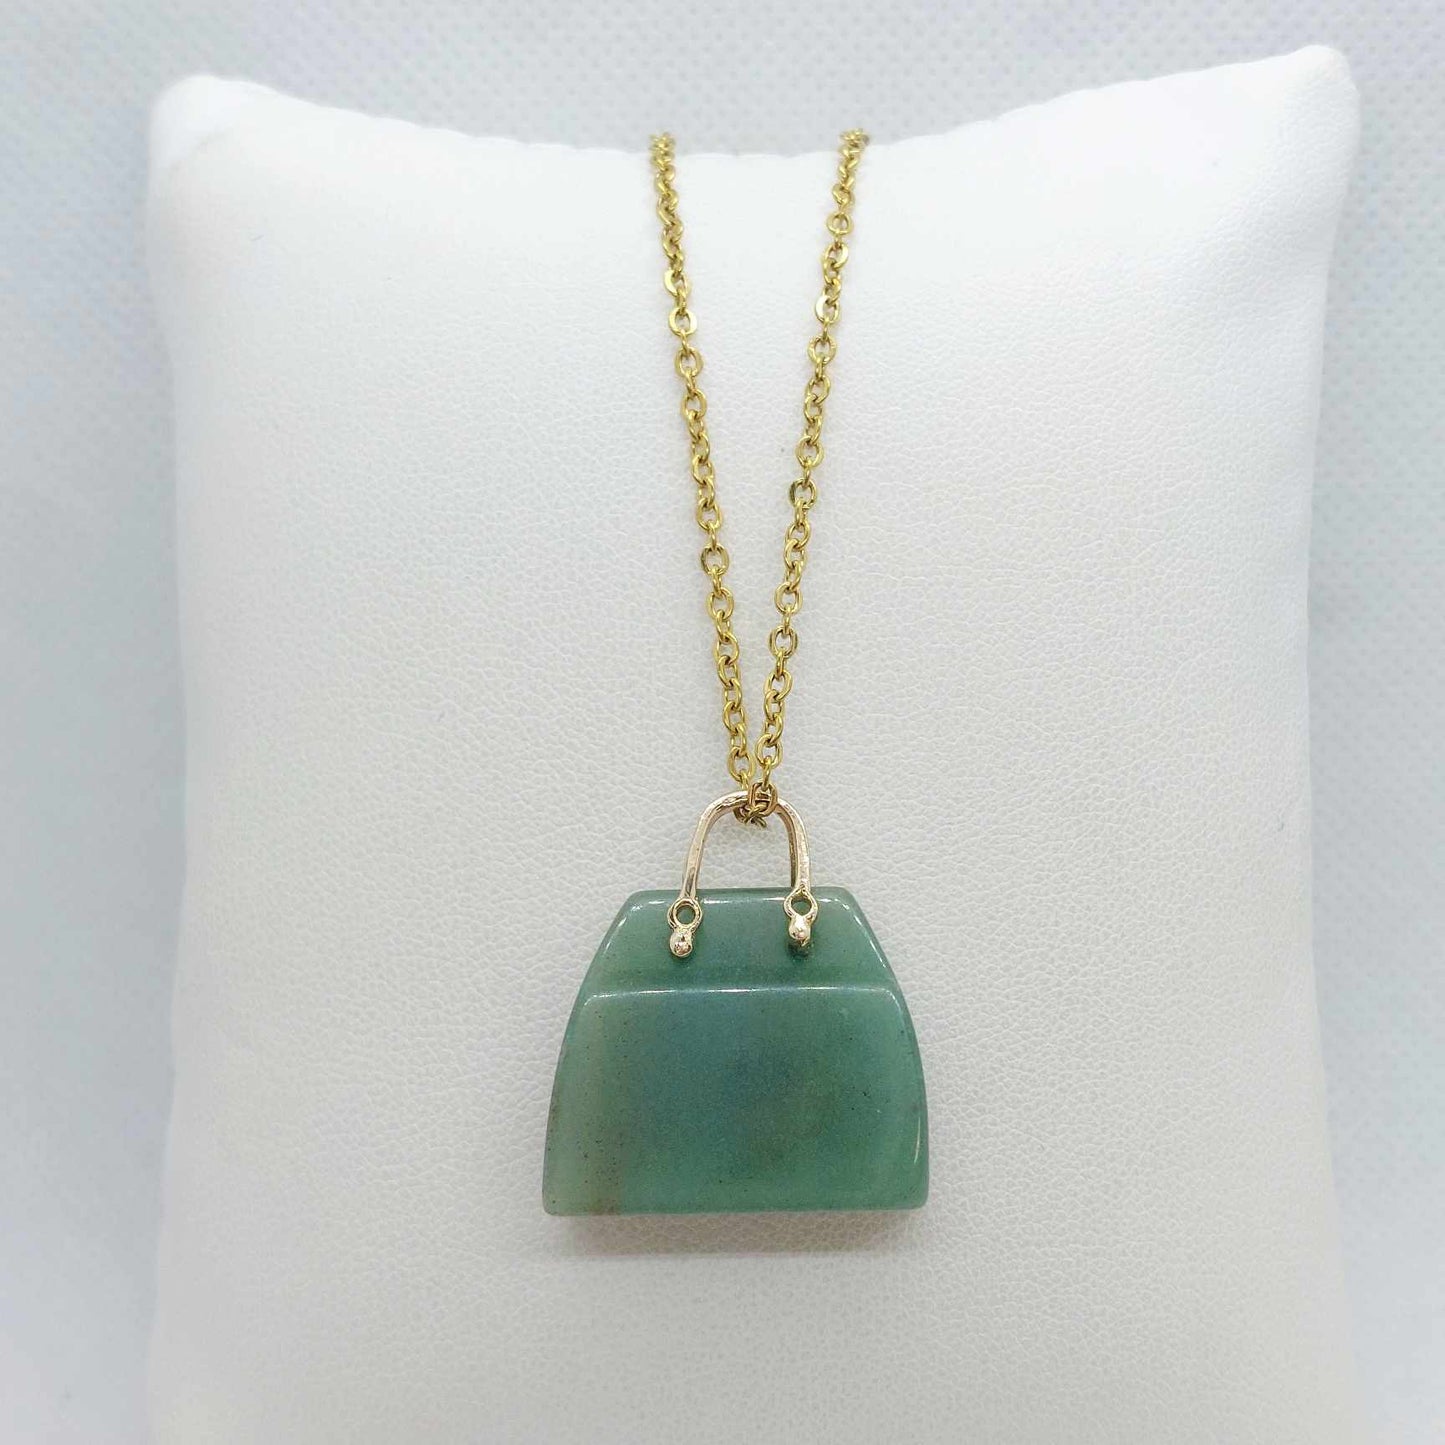 Natural Green Aventurine Handbag Pendant with Gold Plated Stainless Steel Chain Necklace